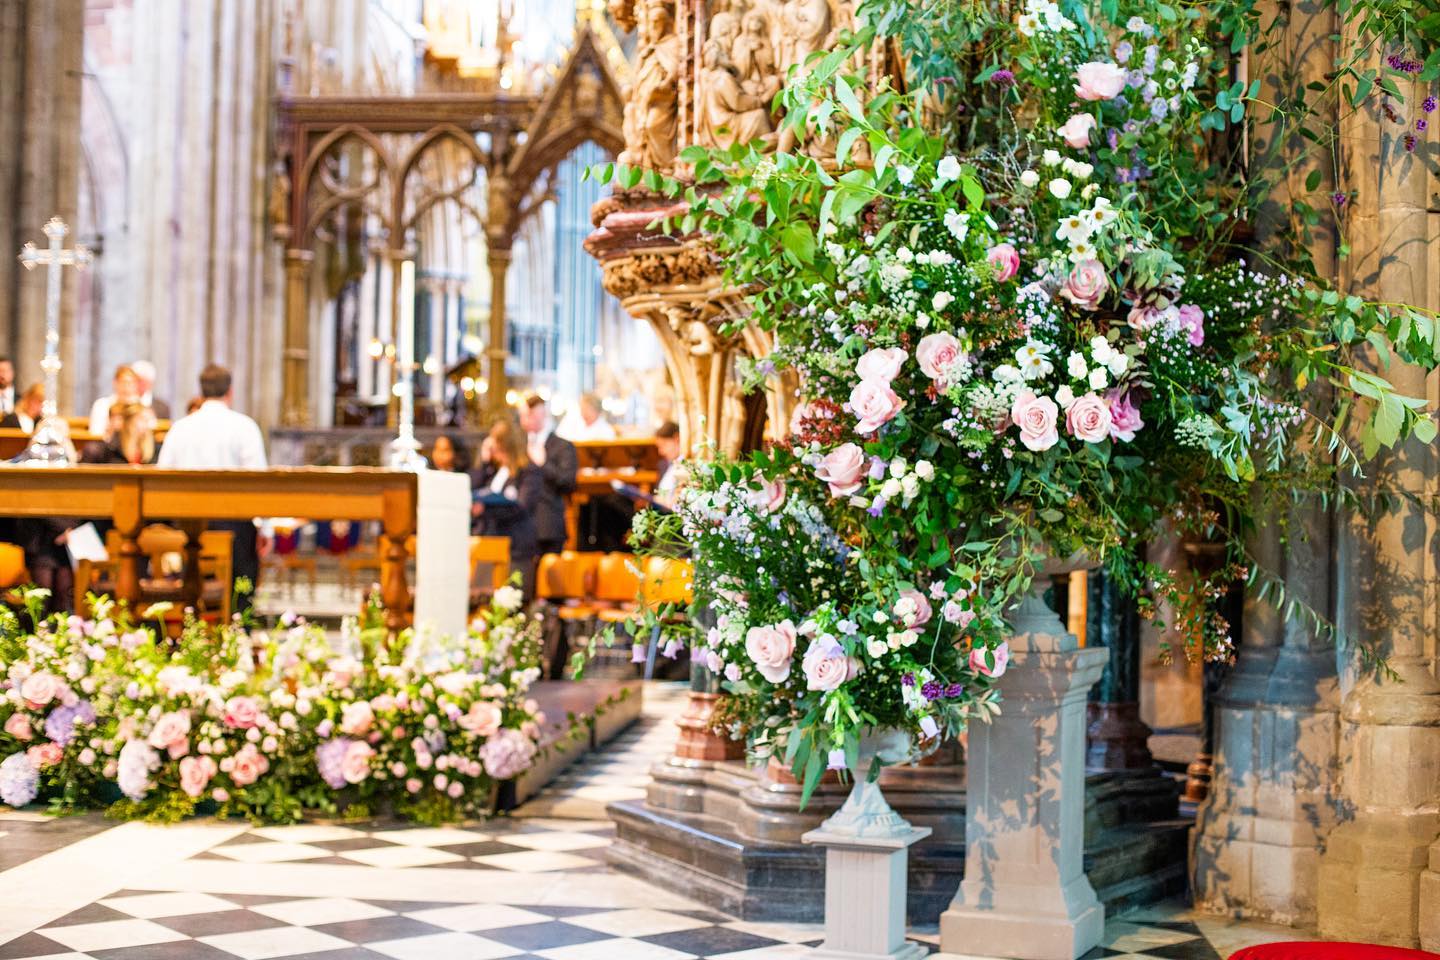 SUSTAINABILITY  I had the pleasure of designing an installation in Worcester cathedral for a beautiful memorial service recently. The majority of flowers and foliage were home grown and the designs natural with no foam. The cathedral has a very dedicated team who work hard to arrange the weekly floral displays. They are all volunteers and rely on weddings and events to fund the flowers they use. Special permission had to obtained for me to install my designs. I had a long discussion with the ladies about sustainability and the use of floral foam, they were adamant that there was no other choice for them. We talked about alternatives but the main reason was that if they could not use foam they would lose the majority of their members. It’s something that had not occurred to me, the style of their designs is very dependent on foam as a mechanic so how to you persuade people who give their time and often pay for the flowers themselves to change their style and use different mechanics? I have the upmost respect for these ladies and am looking for a way forward. Suggestions welcome 🌿